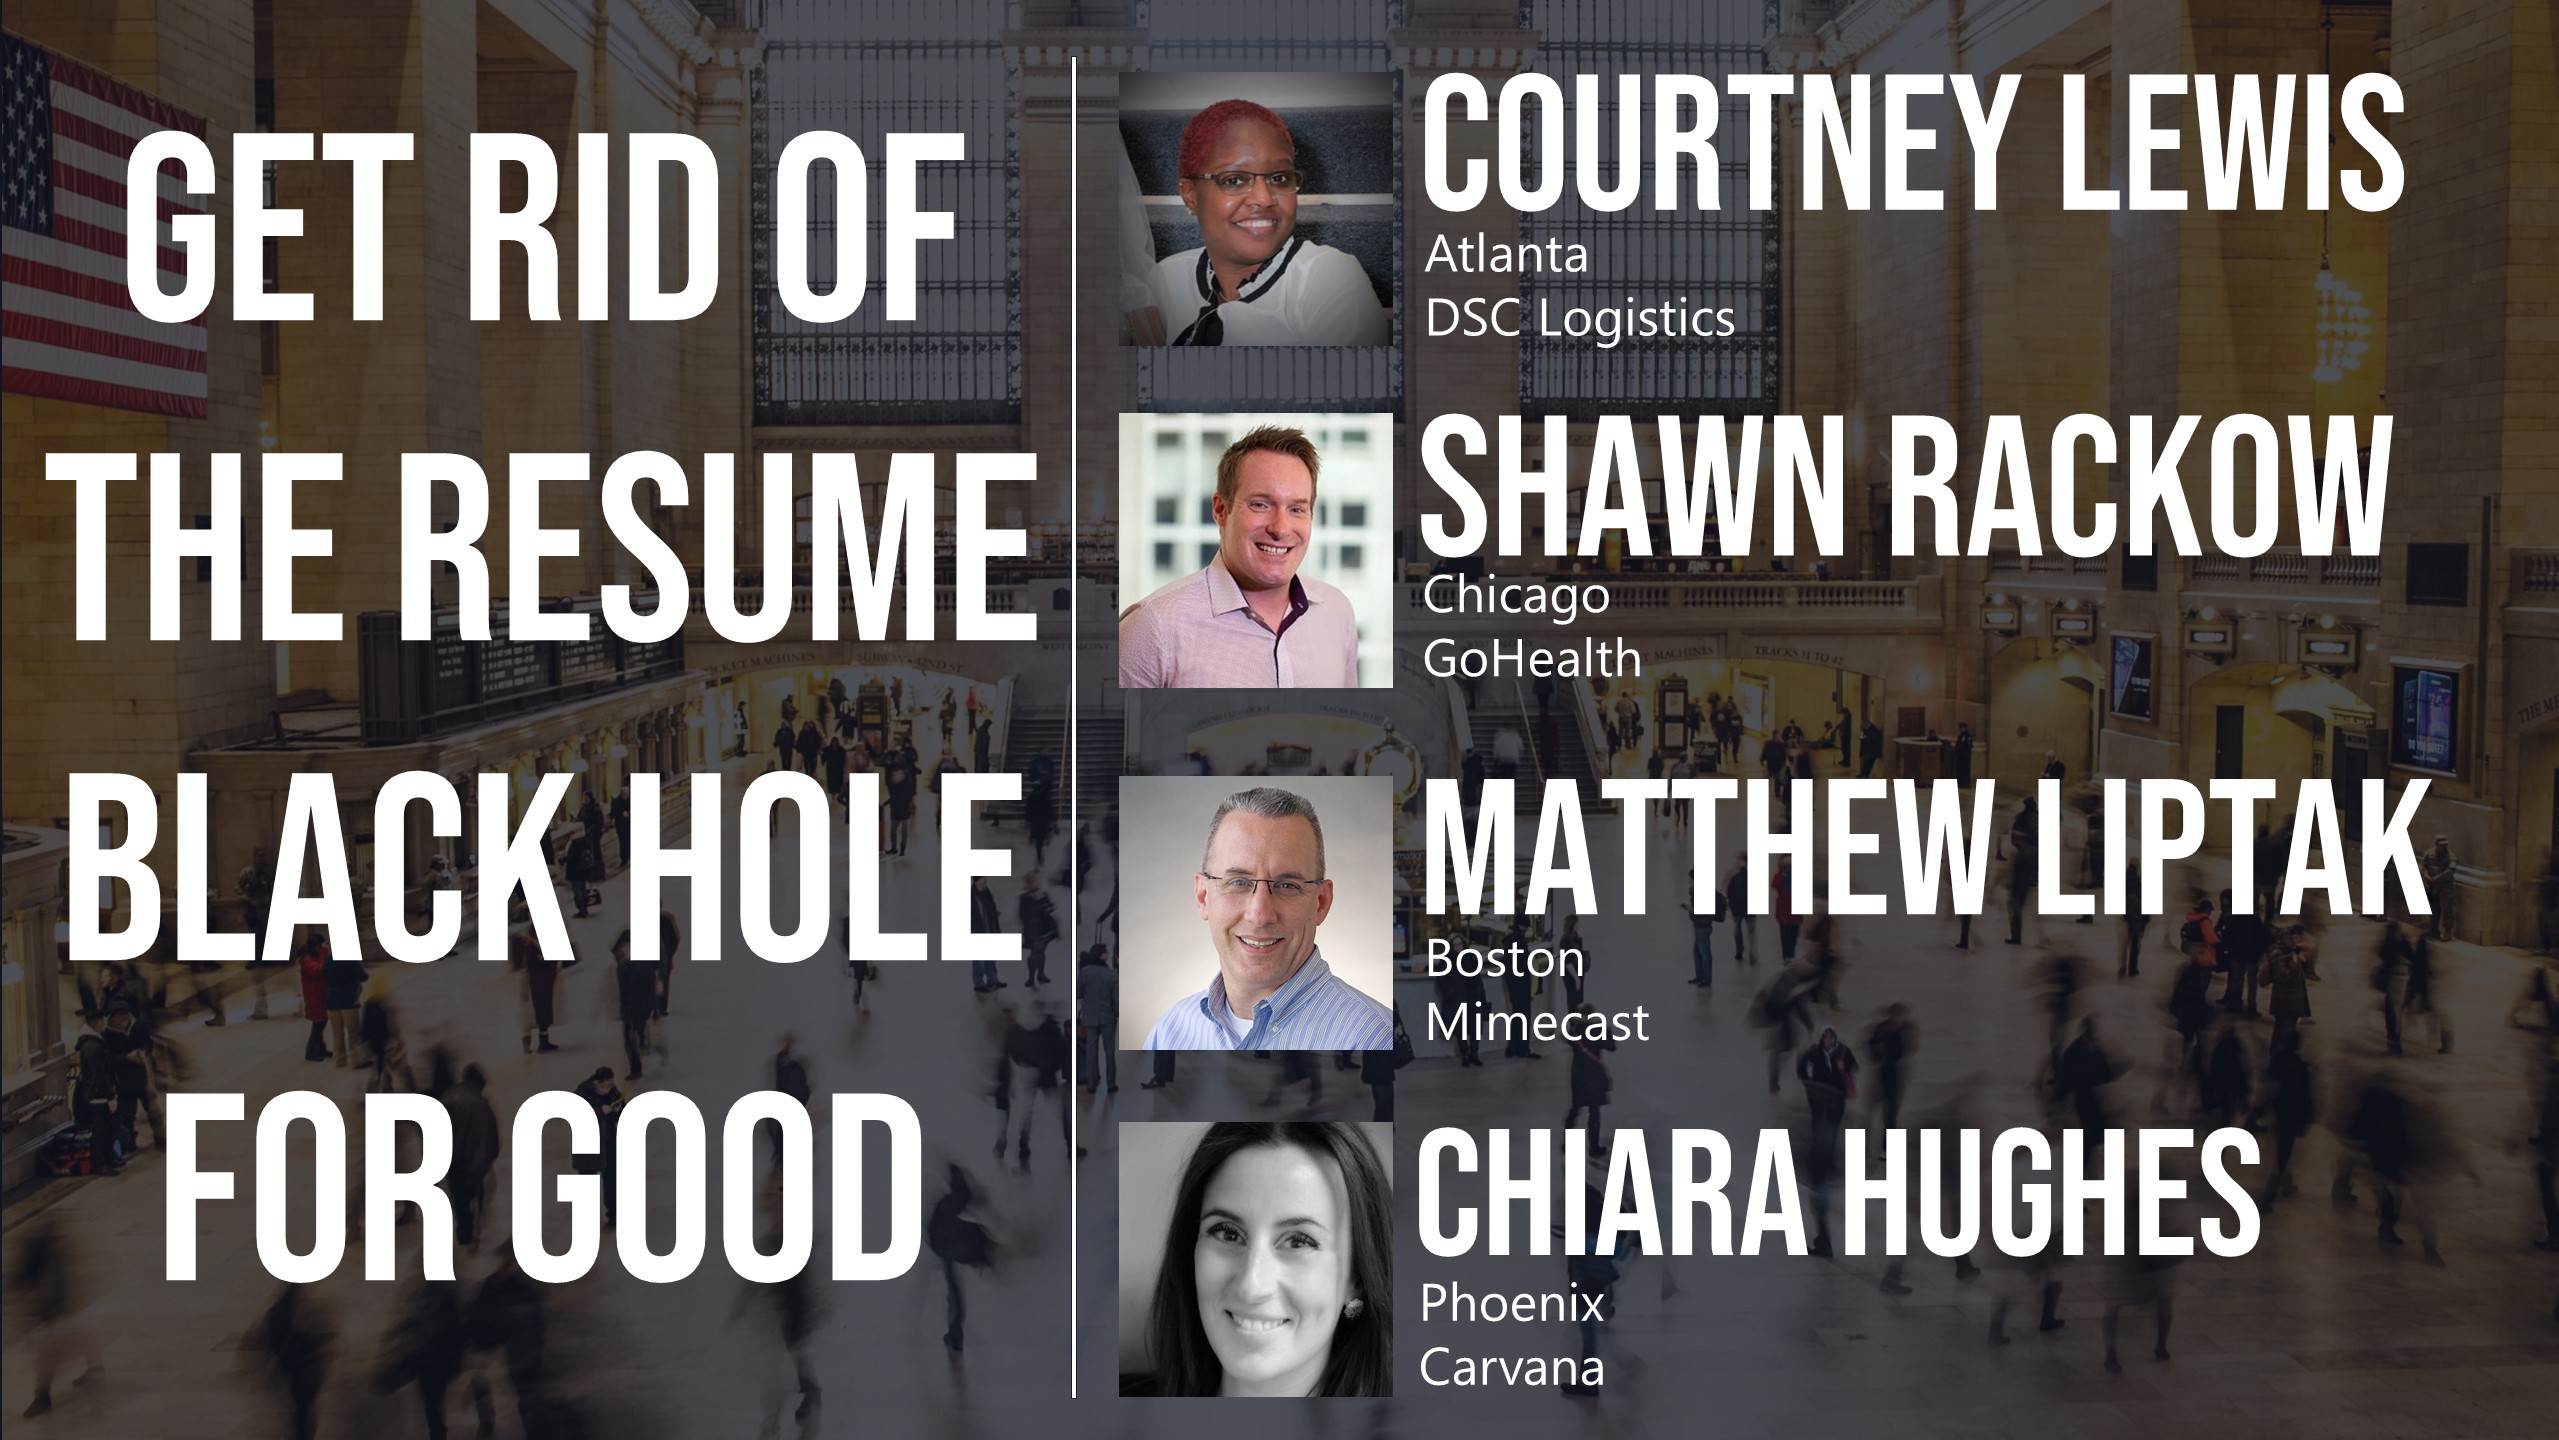 Get Rid of the Resume Black Hole for Good